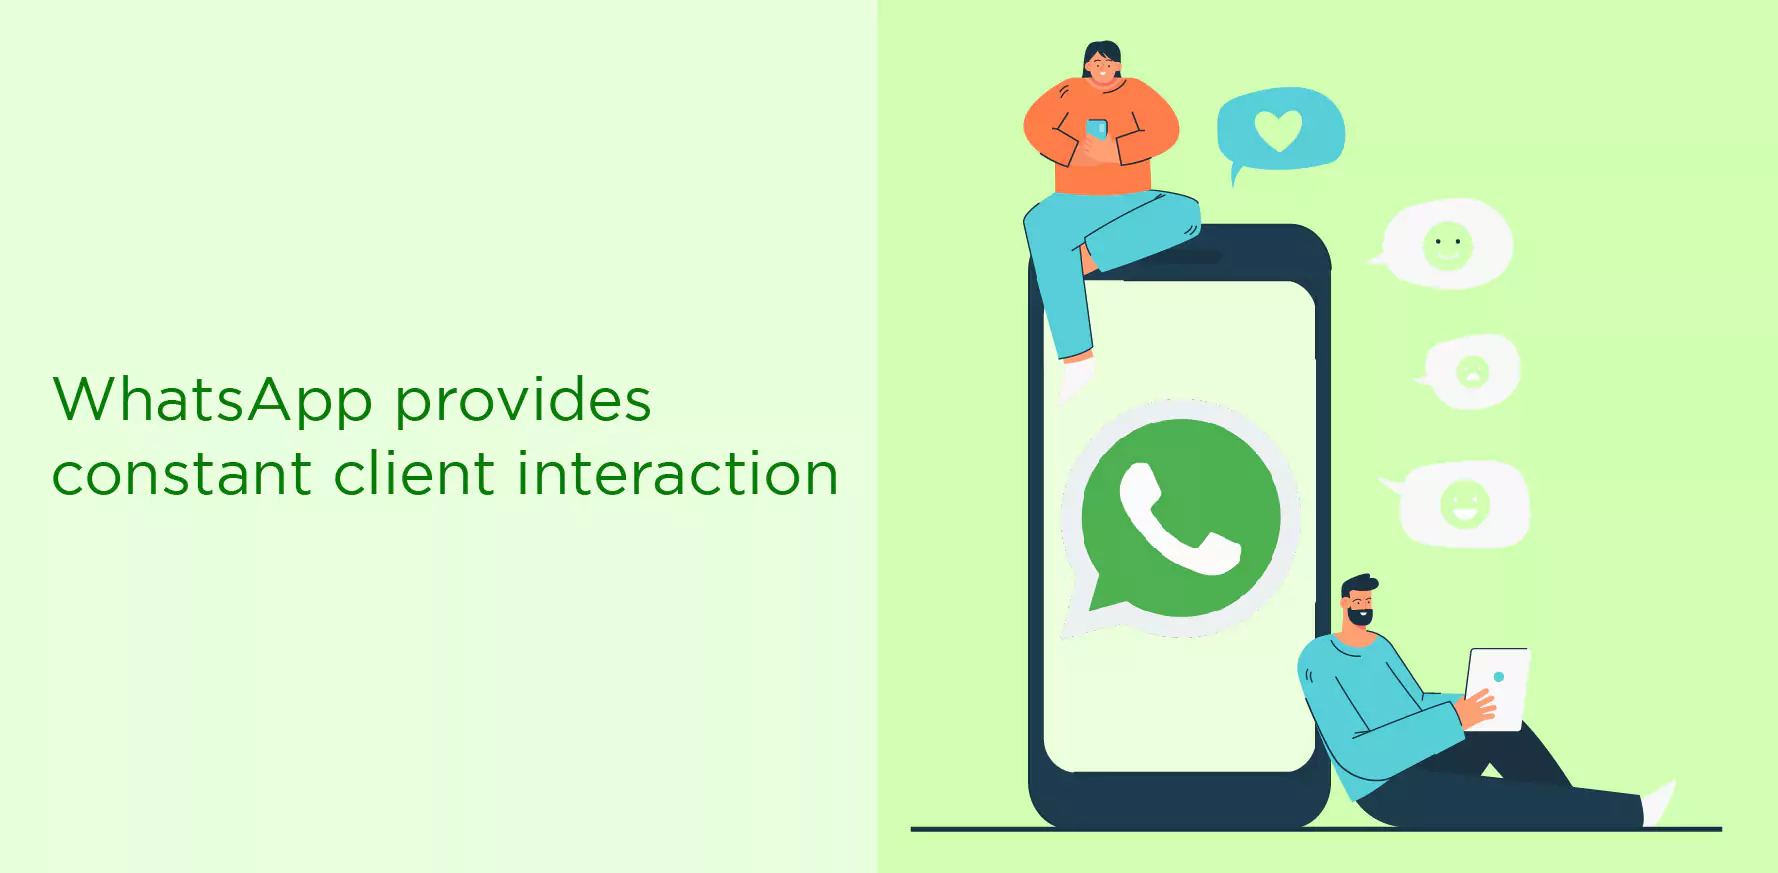 WhatsApp provides constant client interaction: